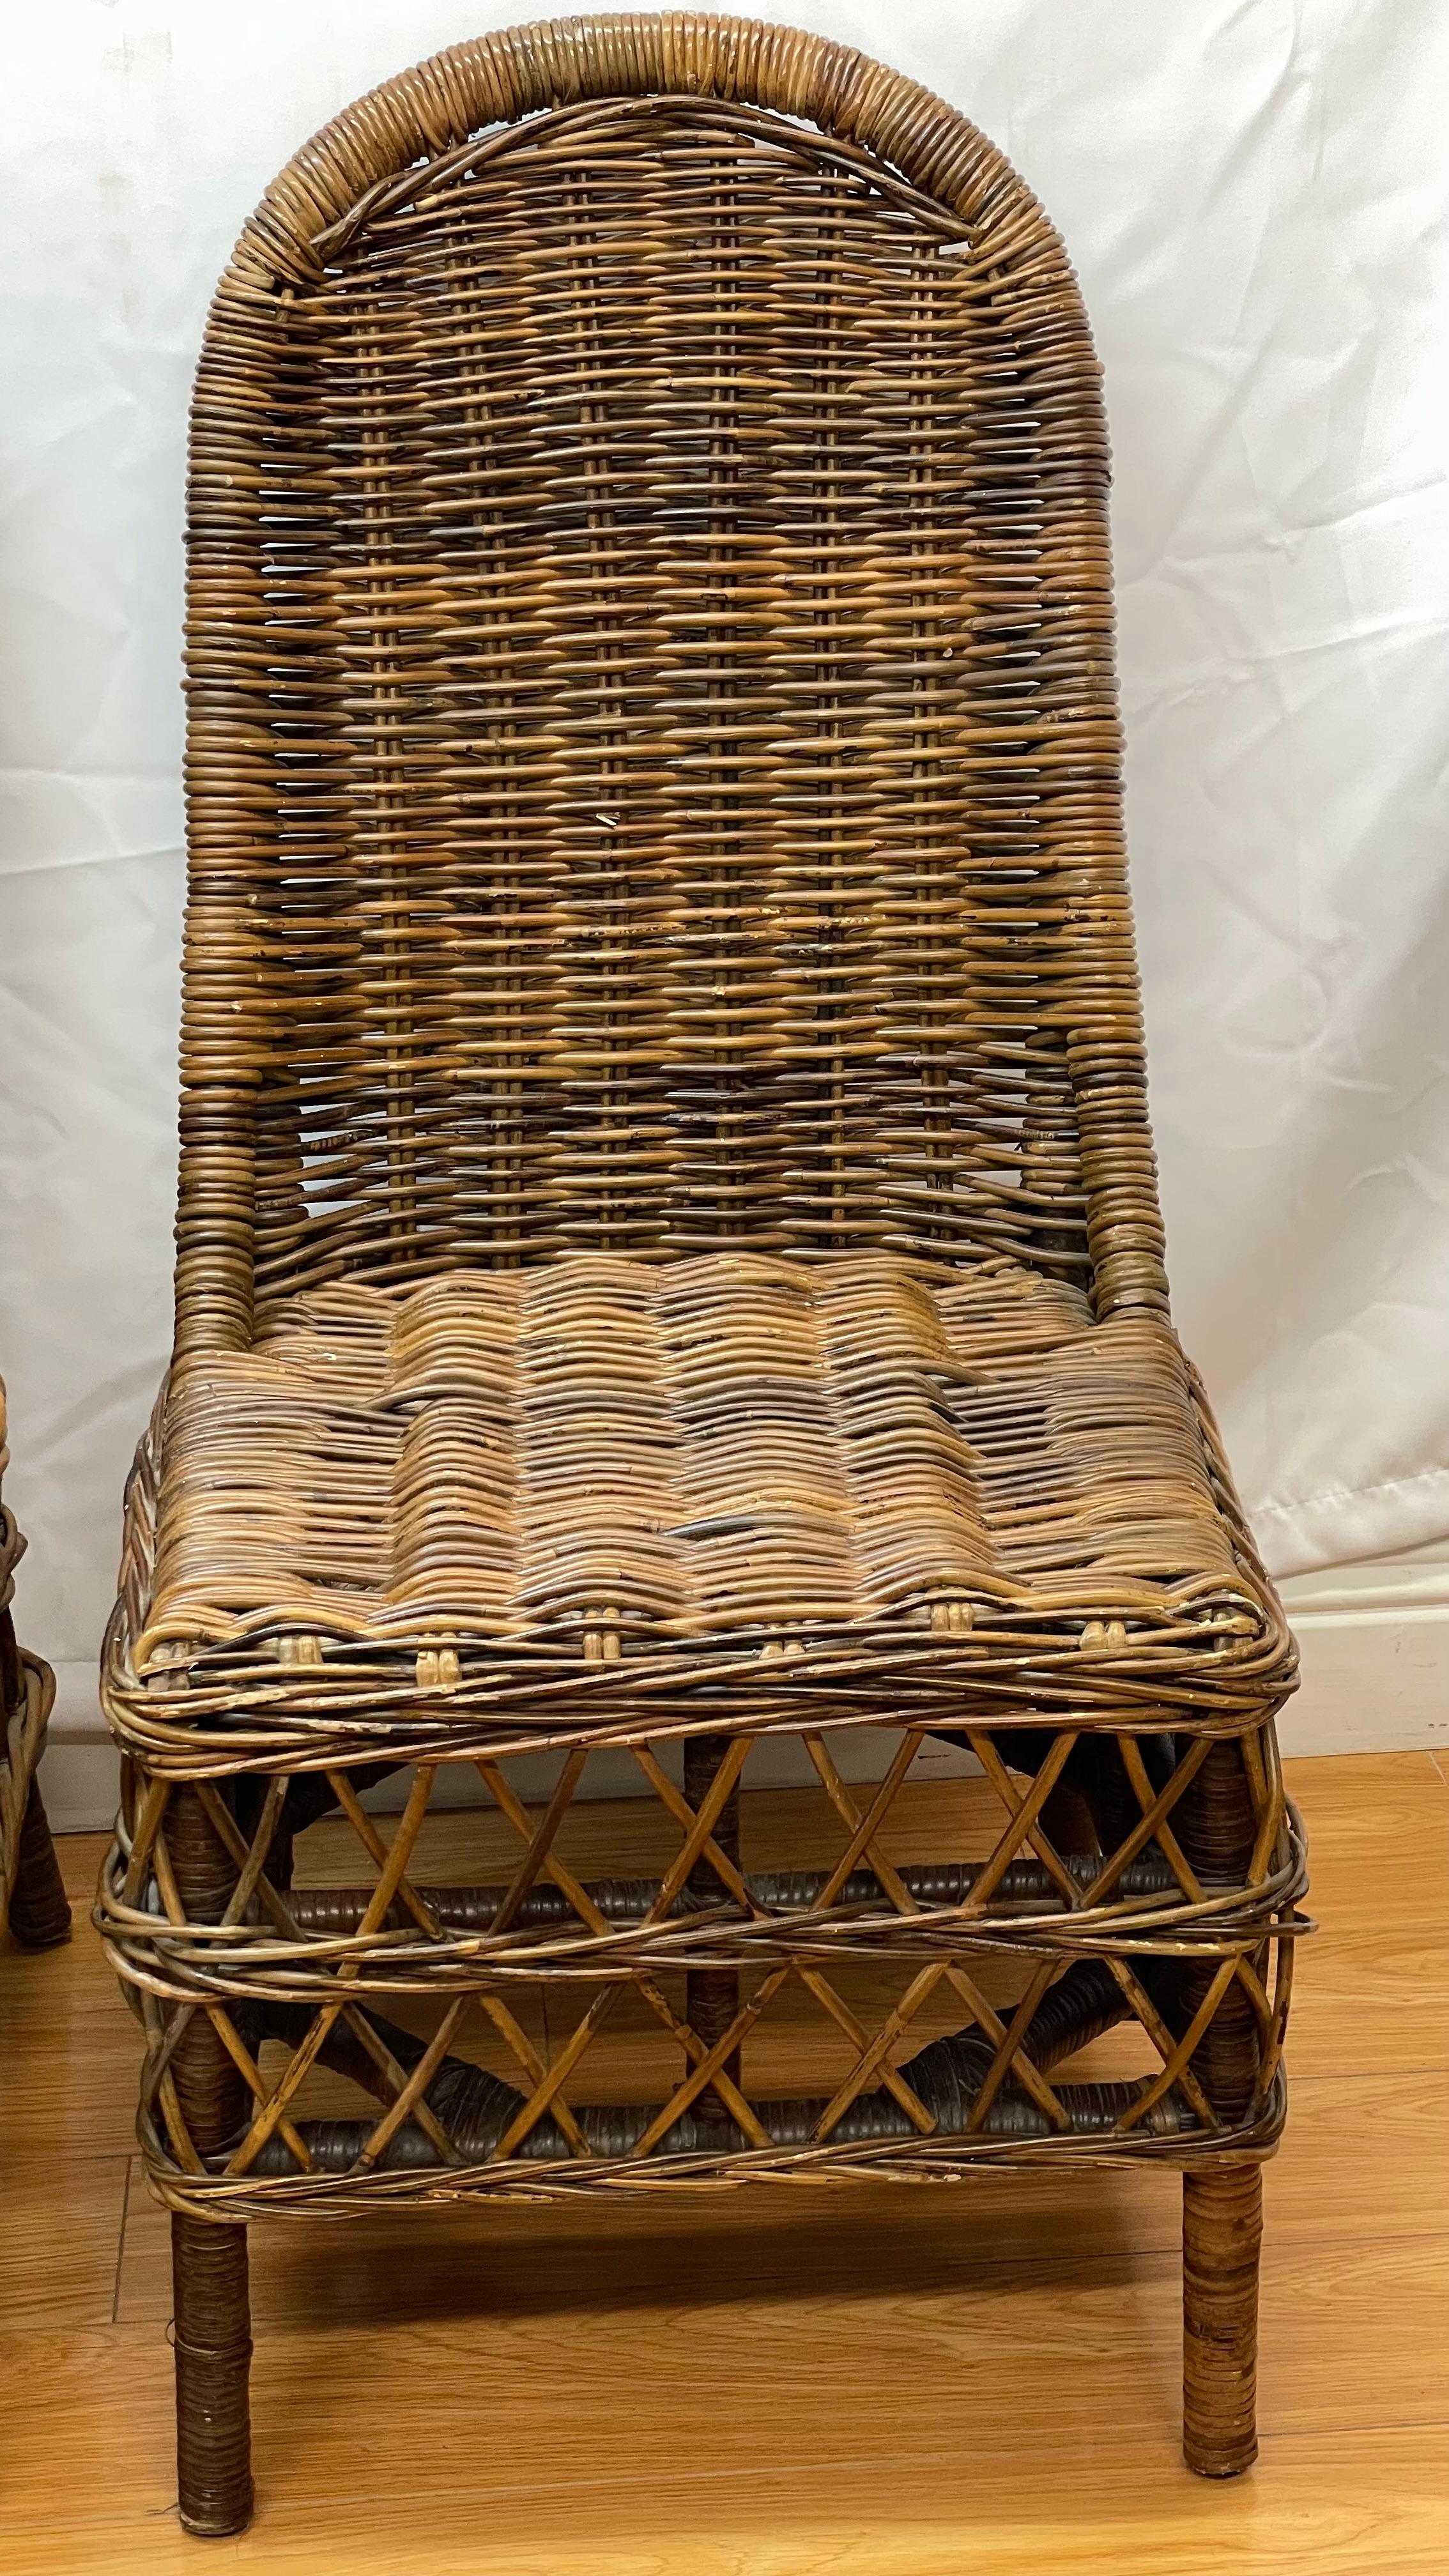 Pair of Hand Woven Rustic Side Chairs

21 x 21 x 40